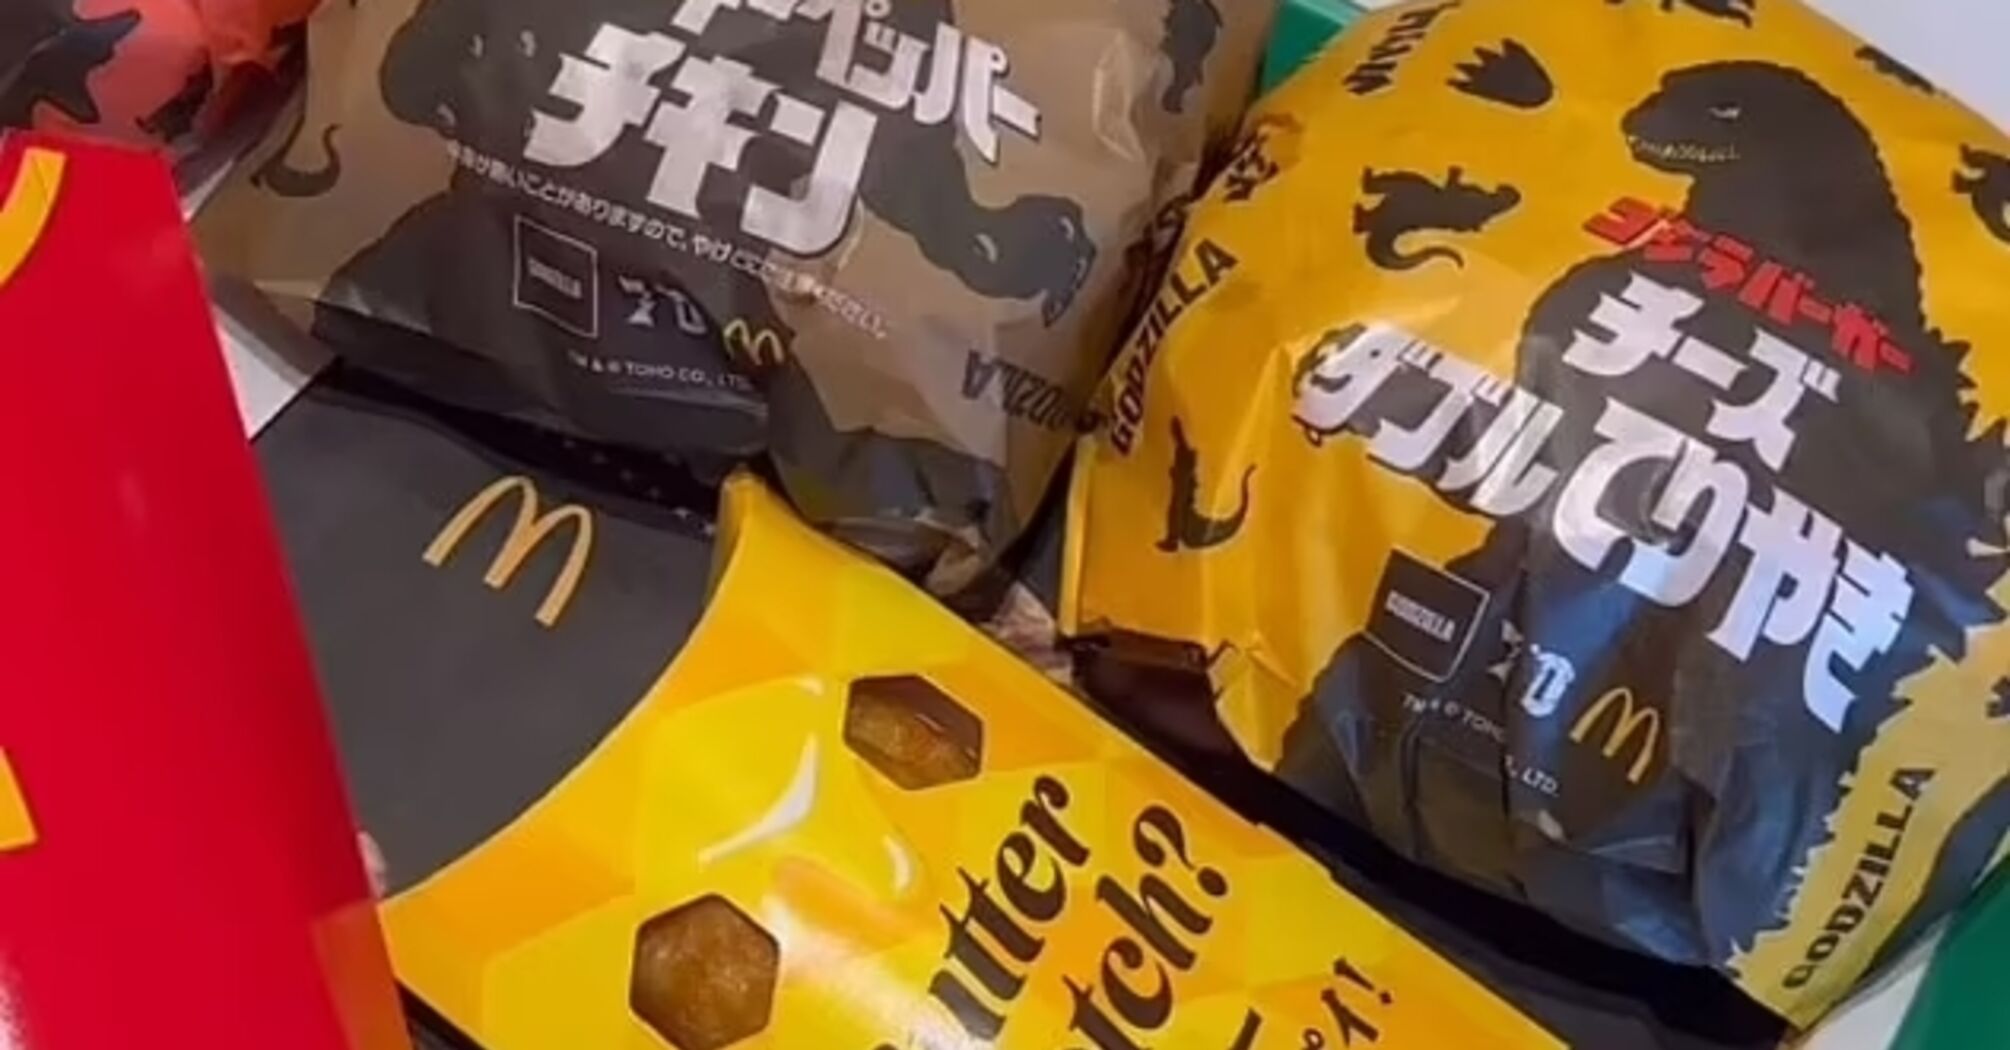 From the "Shaka-Shaka" chicken to the GODZILLA burger, food enthusiasts are amazed by the incredible variety of the menu at Japanese McDonald's